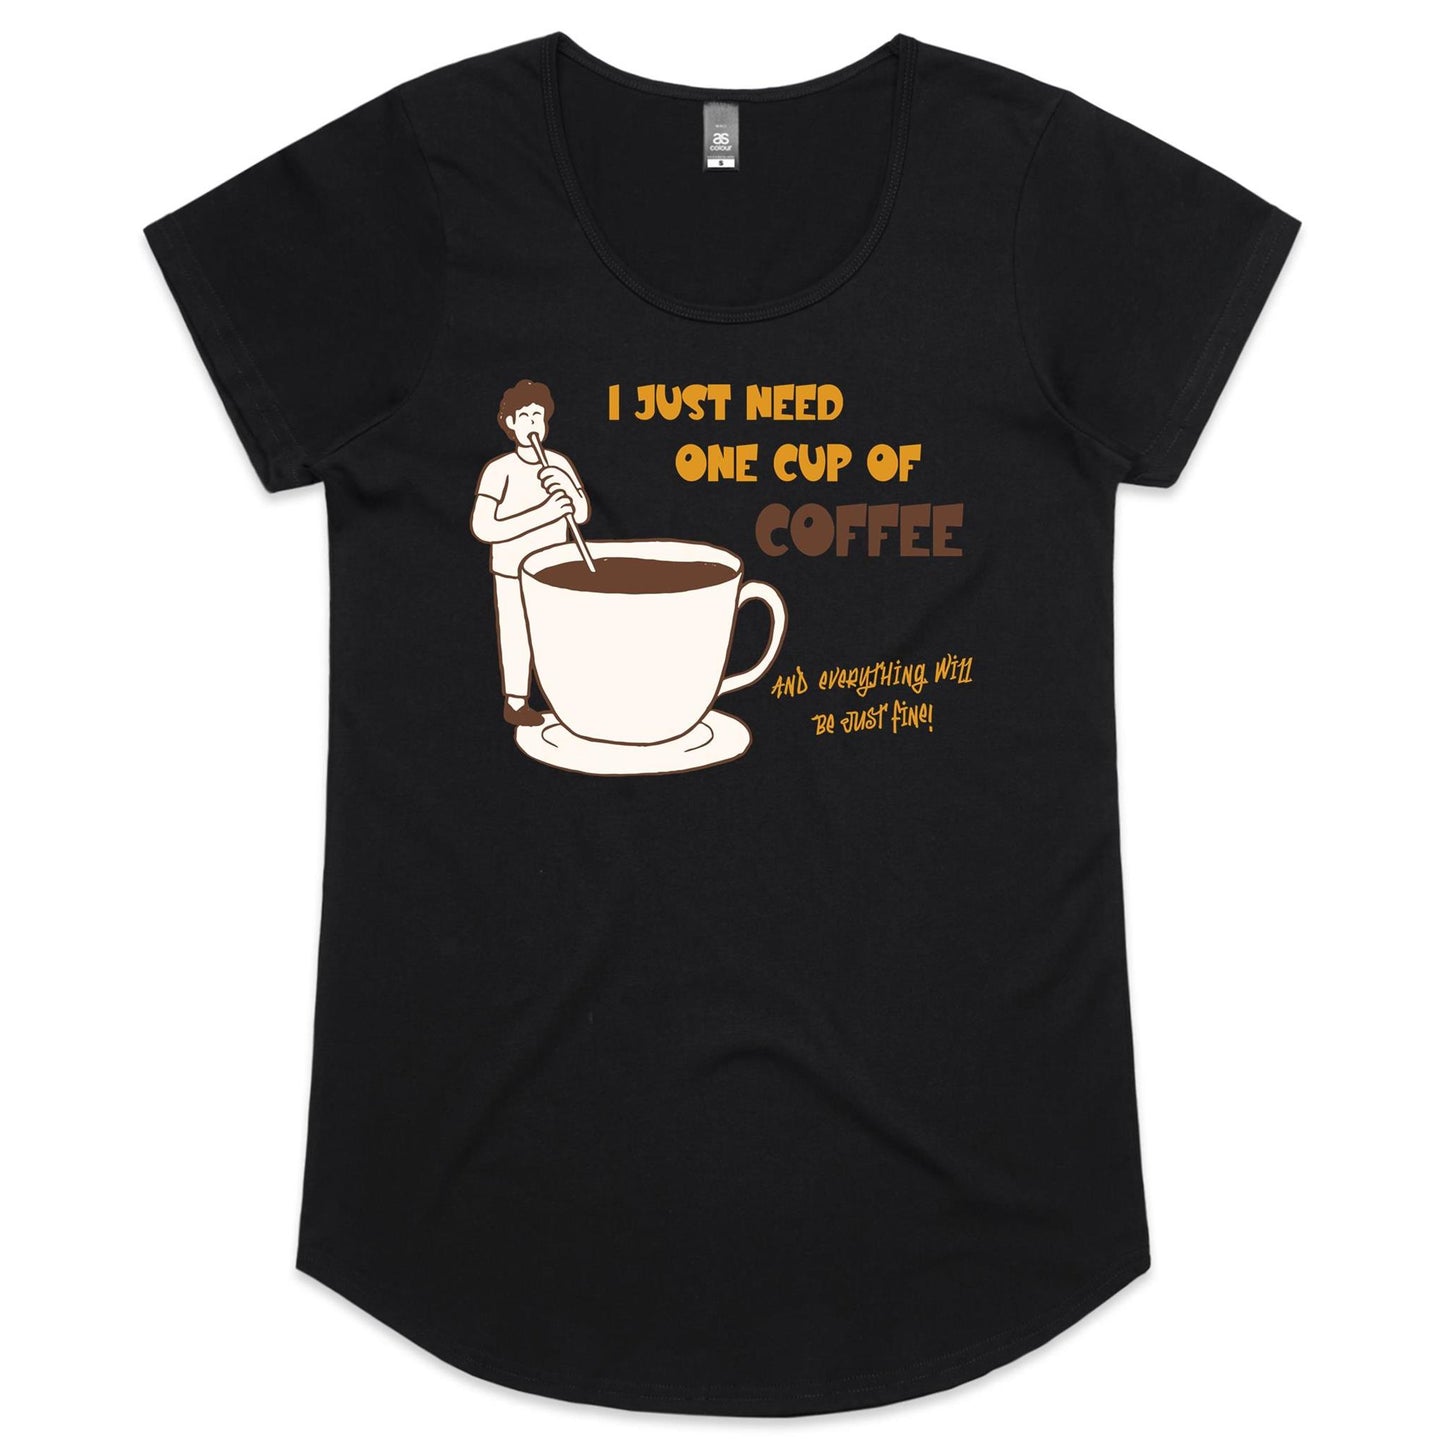 I Just Need One Cup Of Coffee And Everything Will Be Just Fine - Womens Scoop Neck T-Shirt Black Womens Scoop Neck T-shirt Coffee